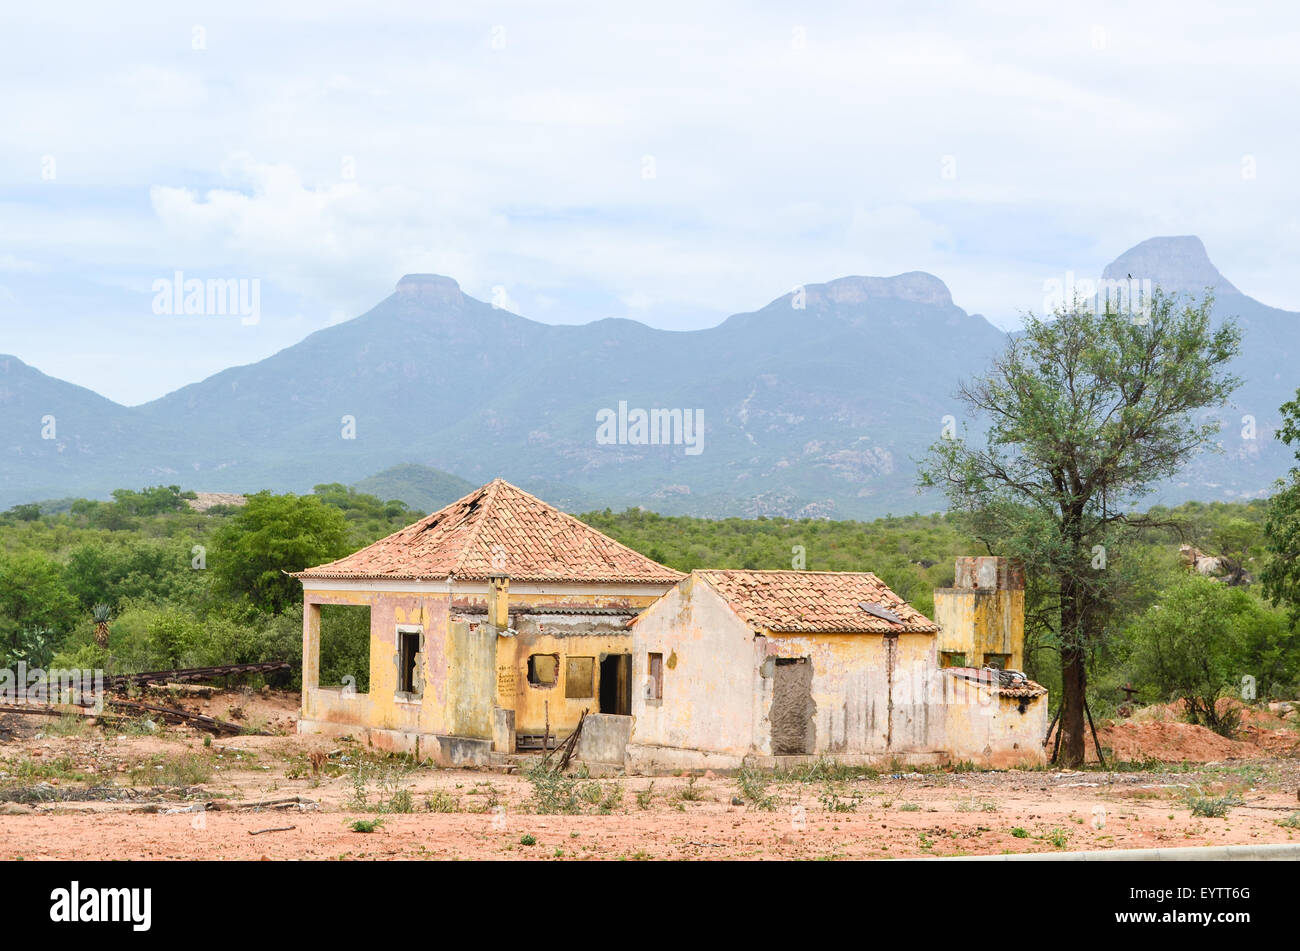 Ruins of  the old Assuncao train station in rural Angola, Namiba province, with bullet holes visible on the walls Stock Photo